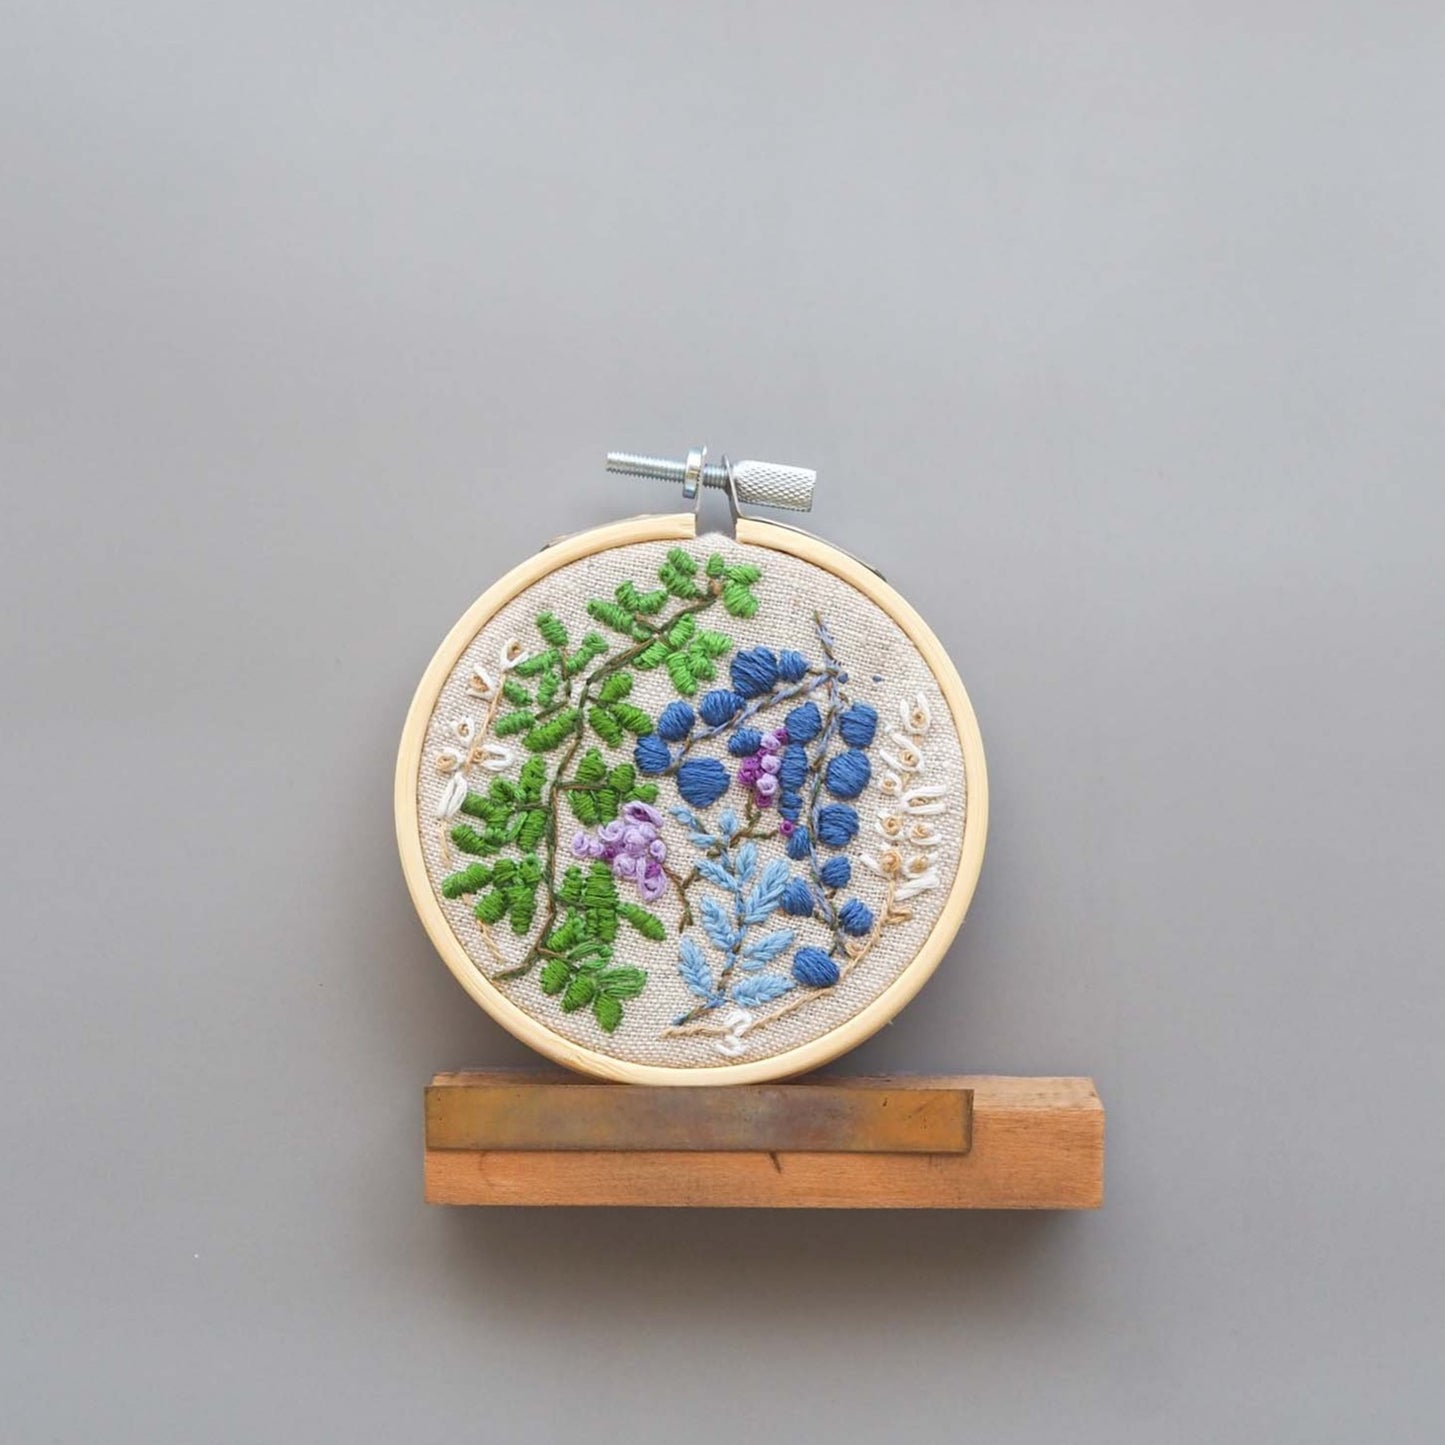 Various small leaves and floral buds in green, blue, and purple stitched on natural linen stretched on a 3 in hoop